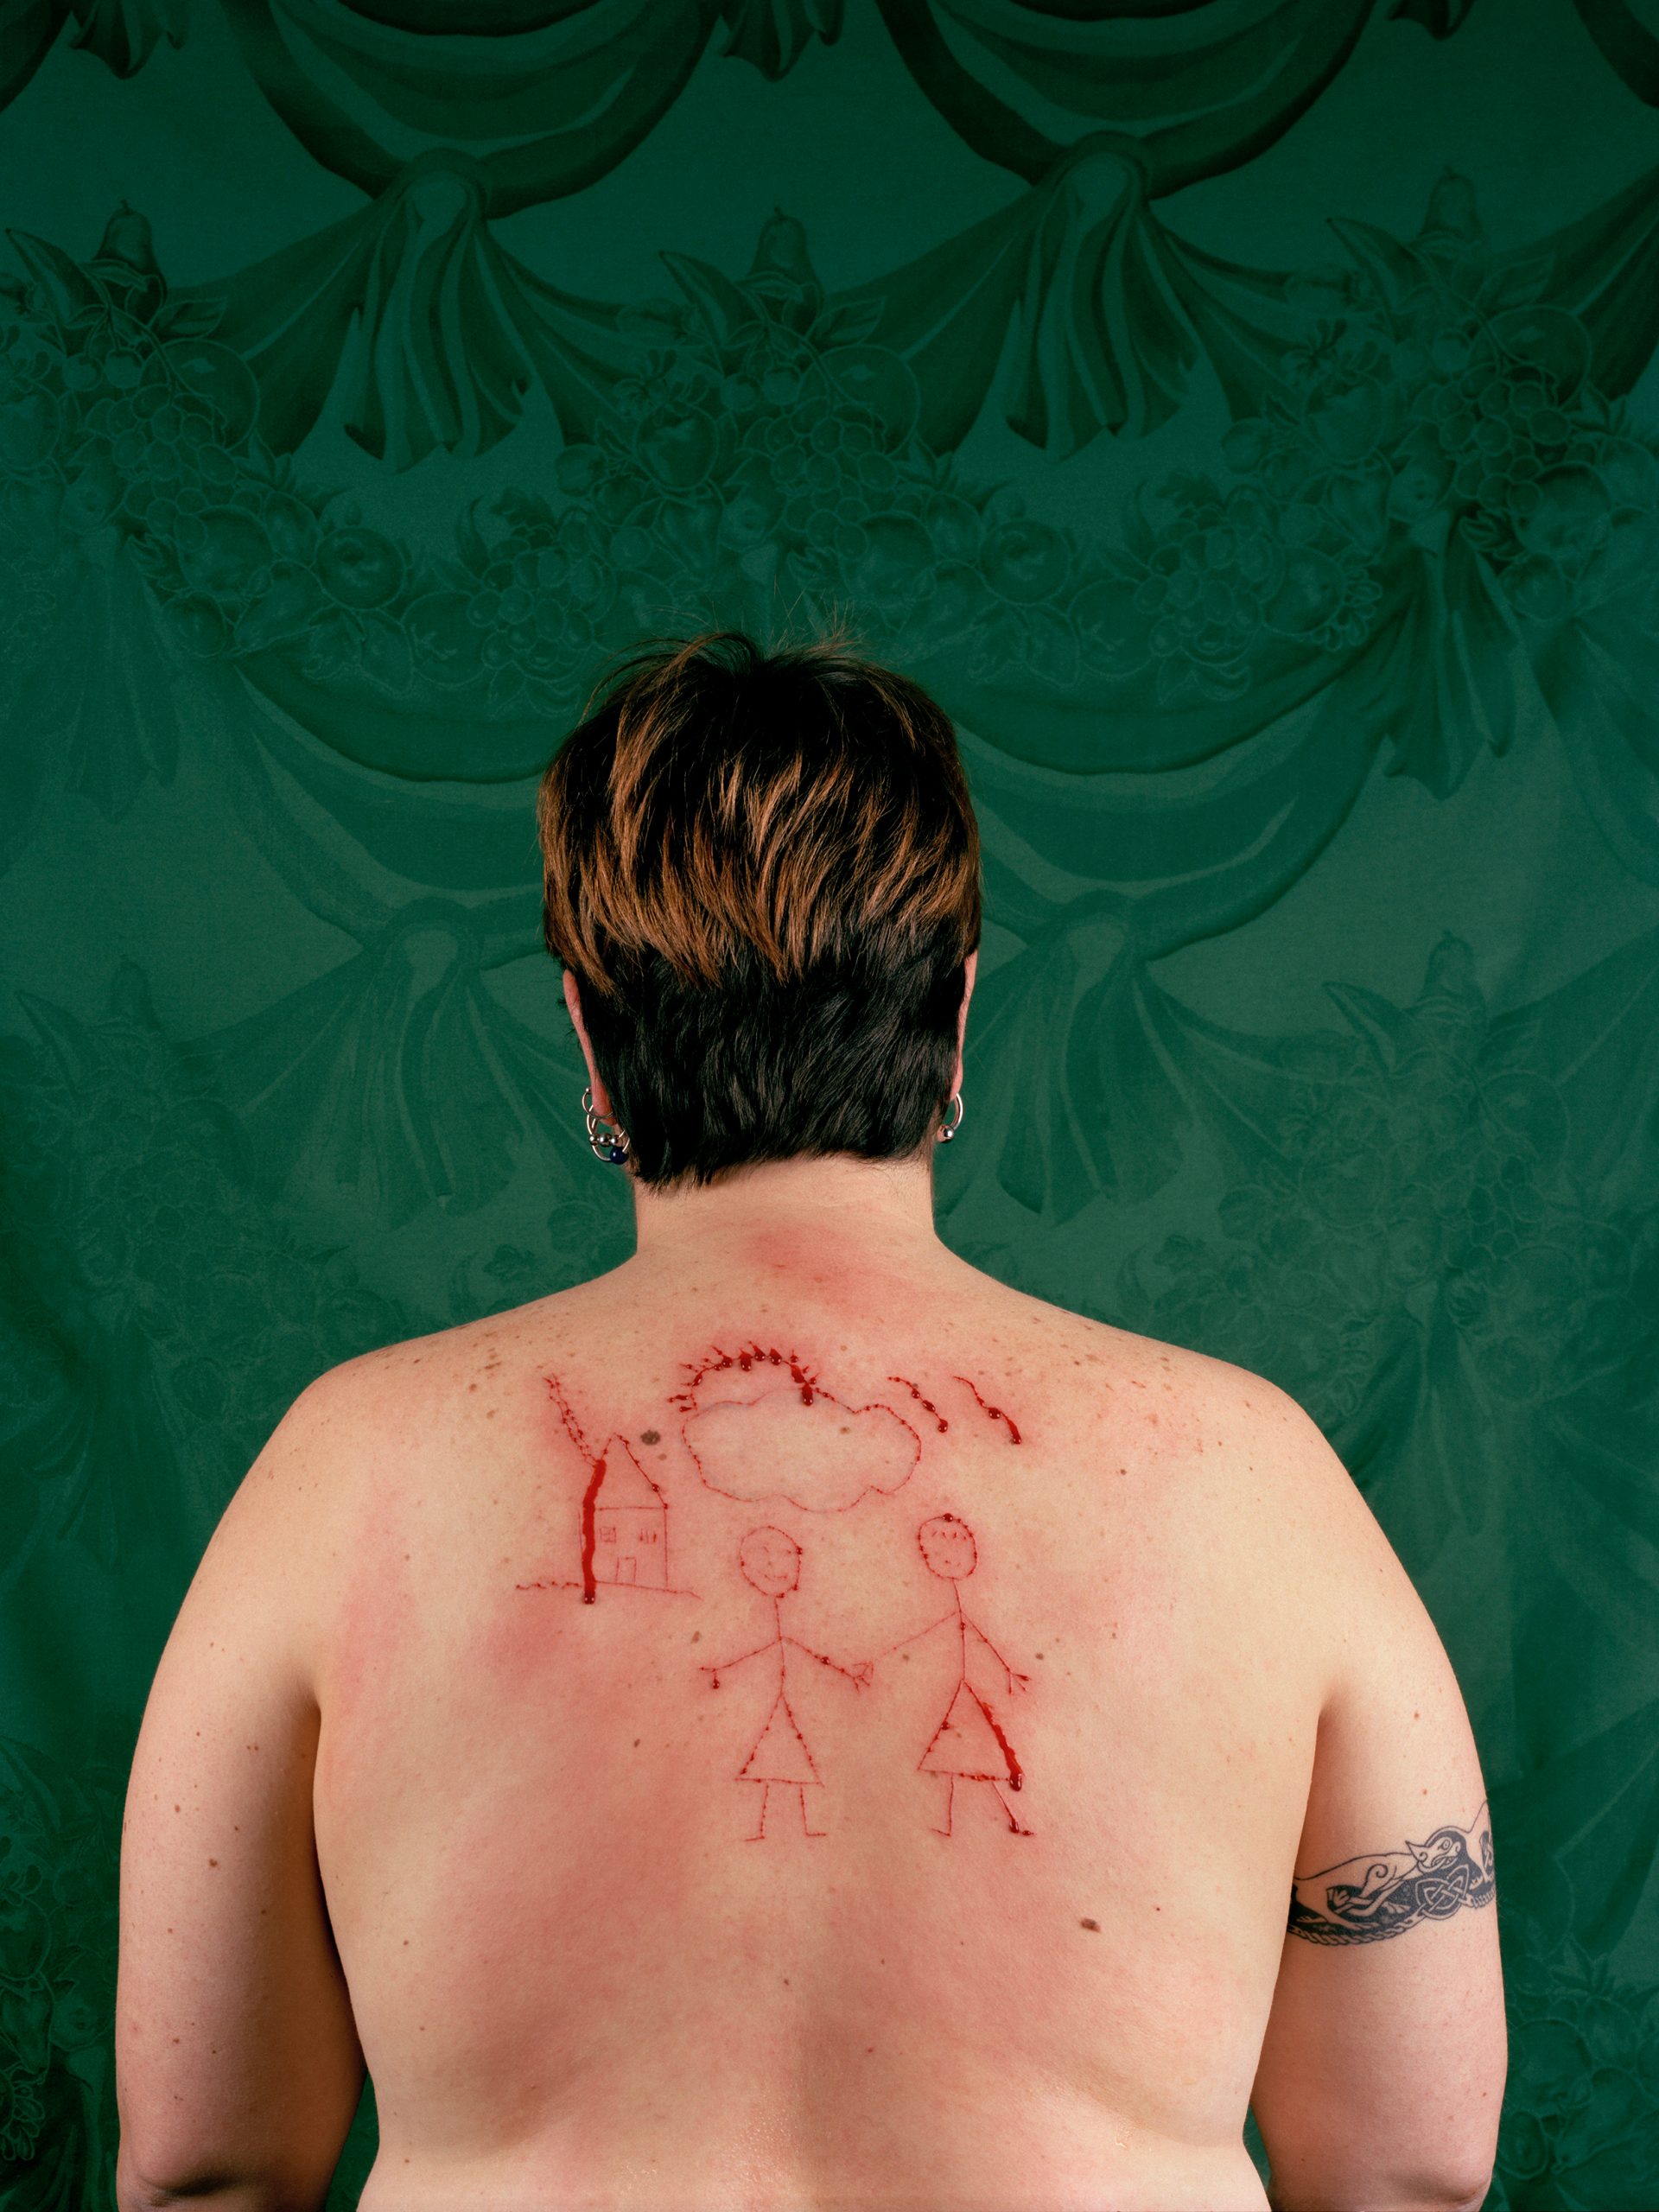 A woman's back with a stick figure drawing of two women and a house etched into her skin